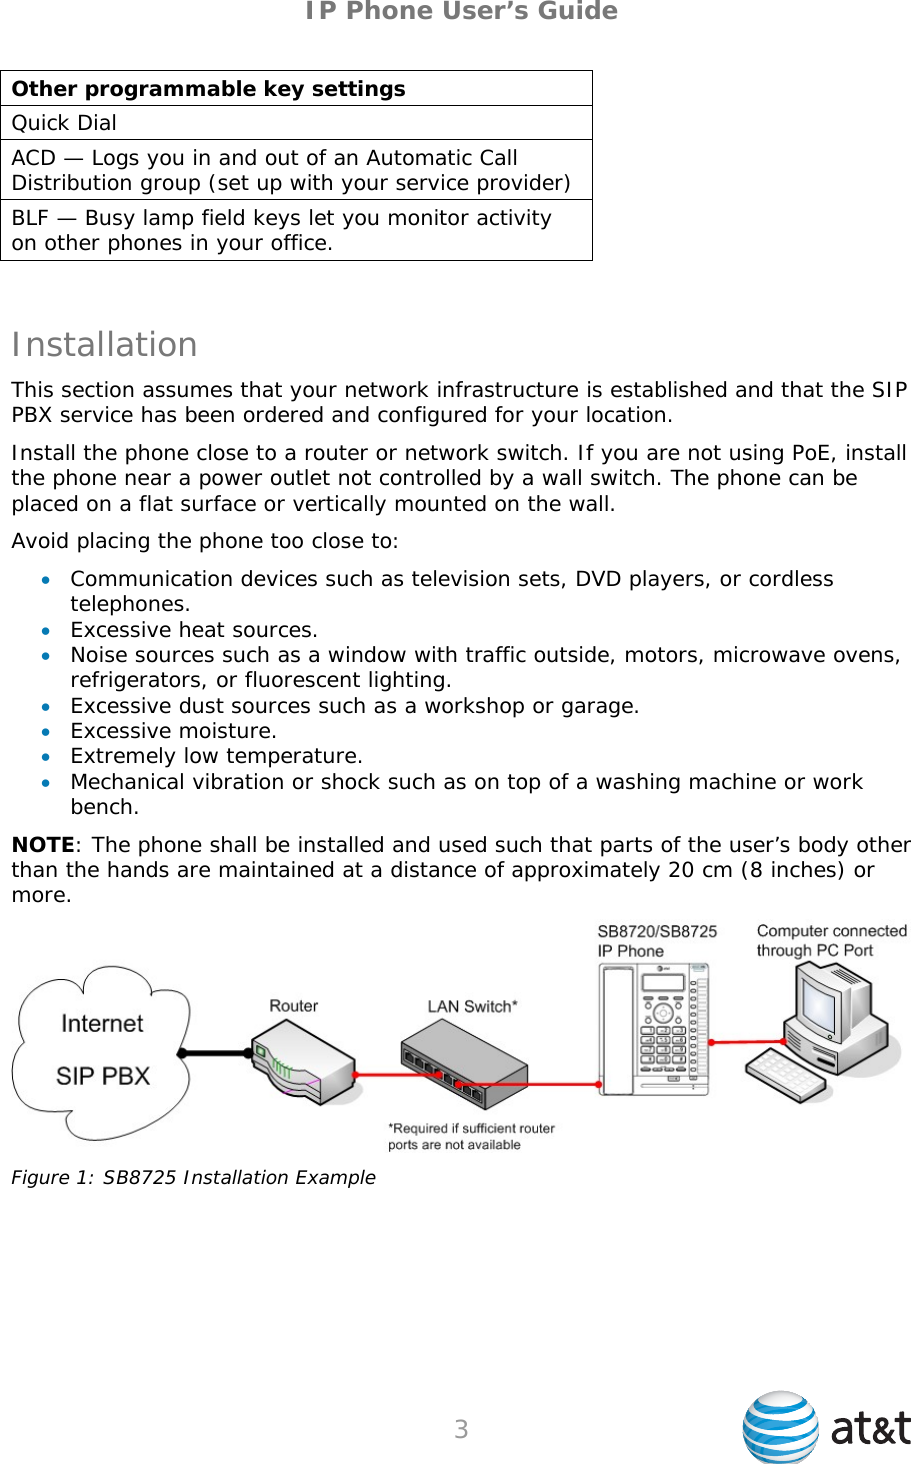 IP Phone User’s Guide Other programmable key settings Quick Dial ACD — Logs you in and out of an Automatic Call Distribution group (set up with your service provider) BLF — Busy lamp field keys let you monitor activity on other phones in your office.  Installation This section assumes that your network infrastructure is established and that the SIP PBX service has been ordered and configured for your location. Install the phone close to a router or network switch. If you are not using PoE, install the phone near a power outlet not controlled by a wall switch. The phone can be placed on a flat surface or vertically mounted on the wall. Avoid placing the phone too close to:  Communication devices such as television sets, DVD players, or cordless telephones.  Excessive heat sources.  Noise sources such as a window with traffic outside, motors, microwave ovens, refrigerators, or fluorescent lighting.  Excessive dust sources such as a workshop or garage.  Excessive moisture.  Extremely low temperature.  Mechanical vibration or shock such as on top of a washing machine or work bench. NOTE: The phone shall be installed and used such that parts of the user’s body other than the hands are maintained at a distance of approximately 20 cm (8 inches) or more.  Figure 1: SB8725 Installation Example  3   